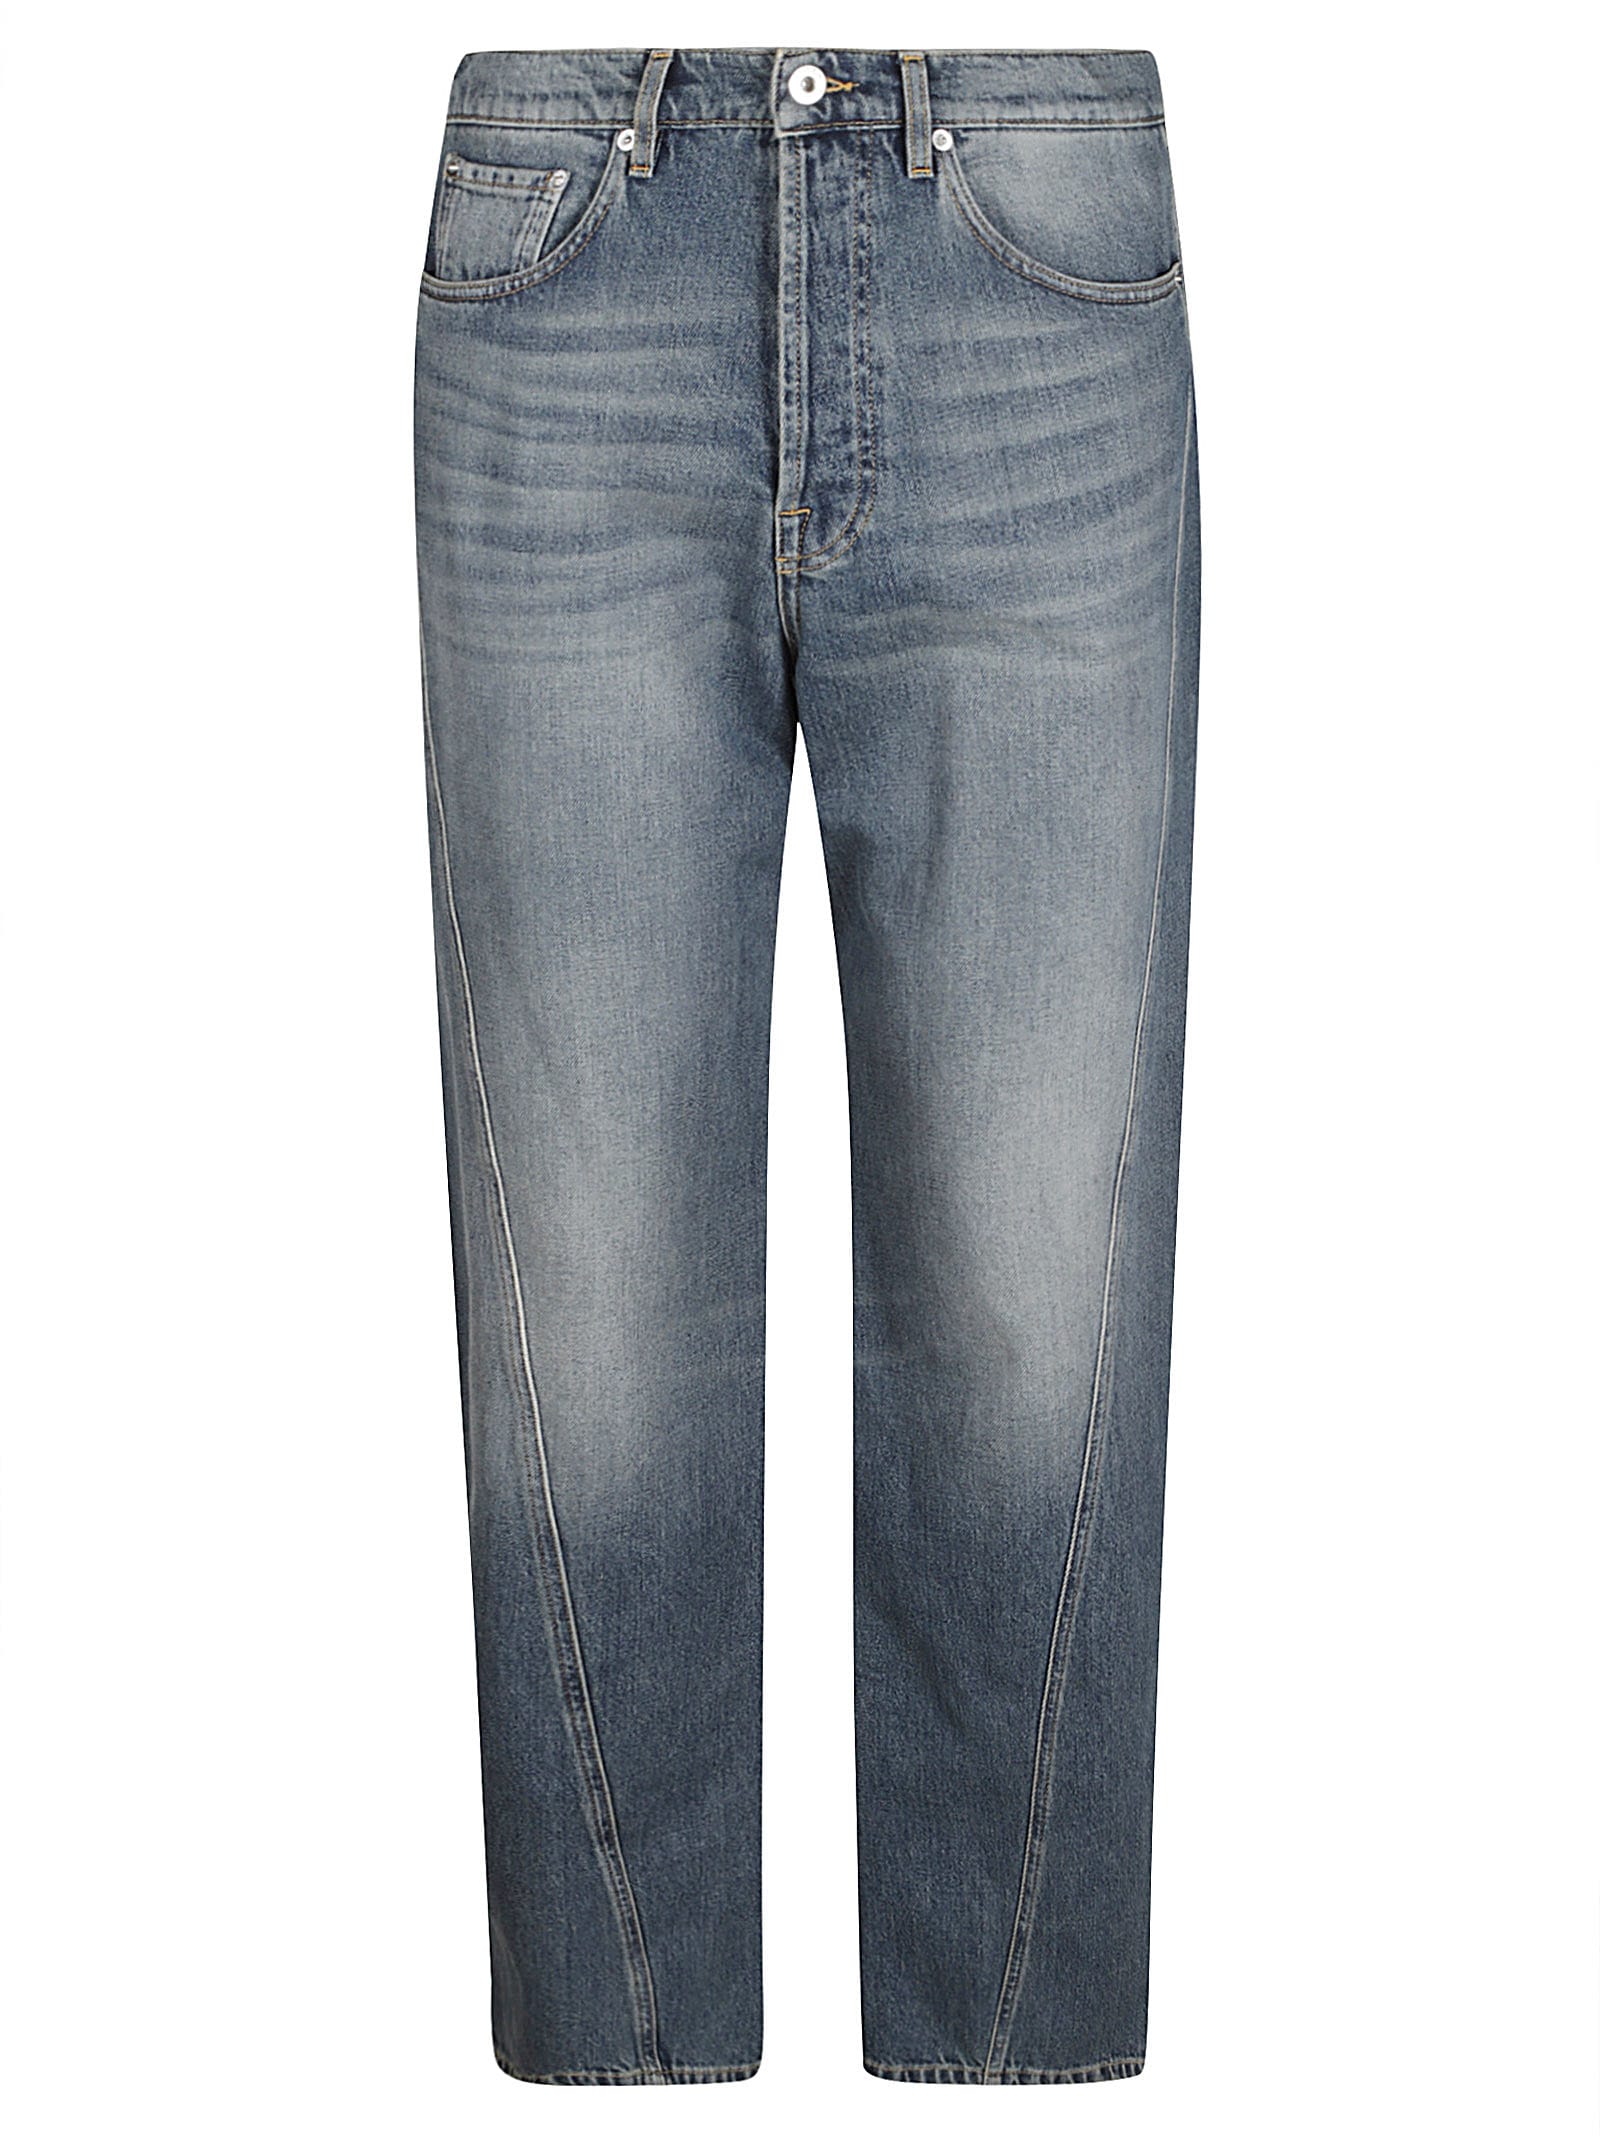 LANVIN STRAIGHT BUTTONED JEANS